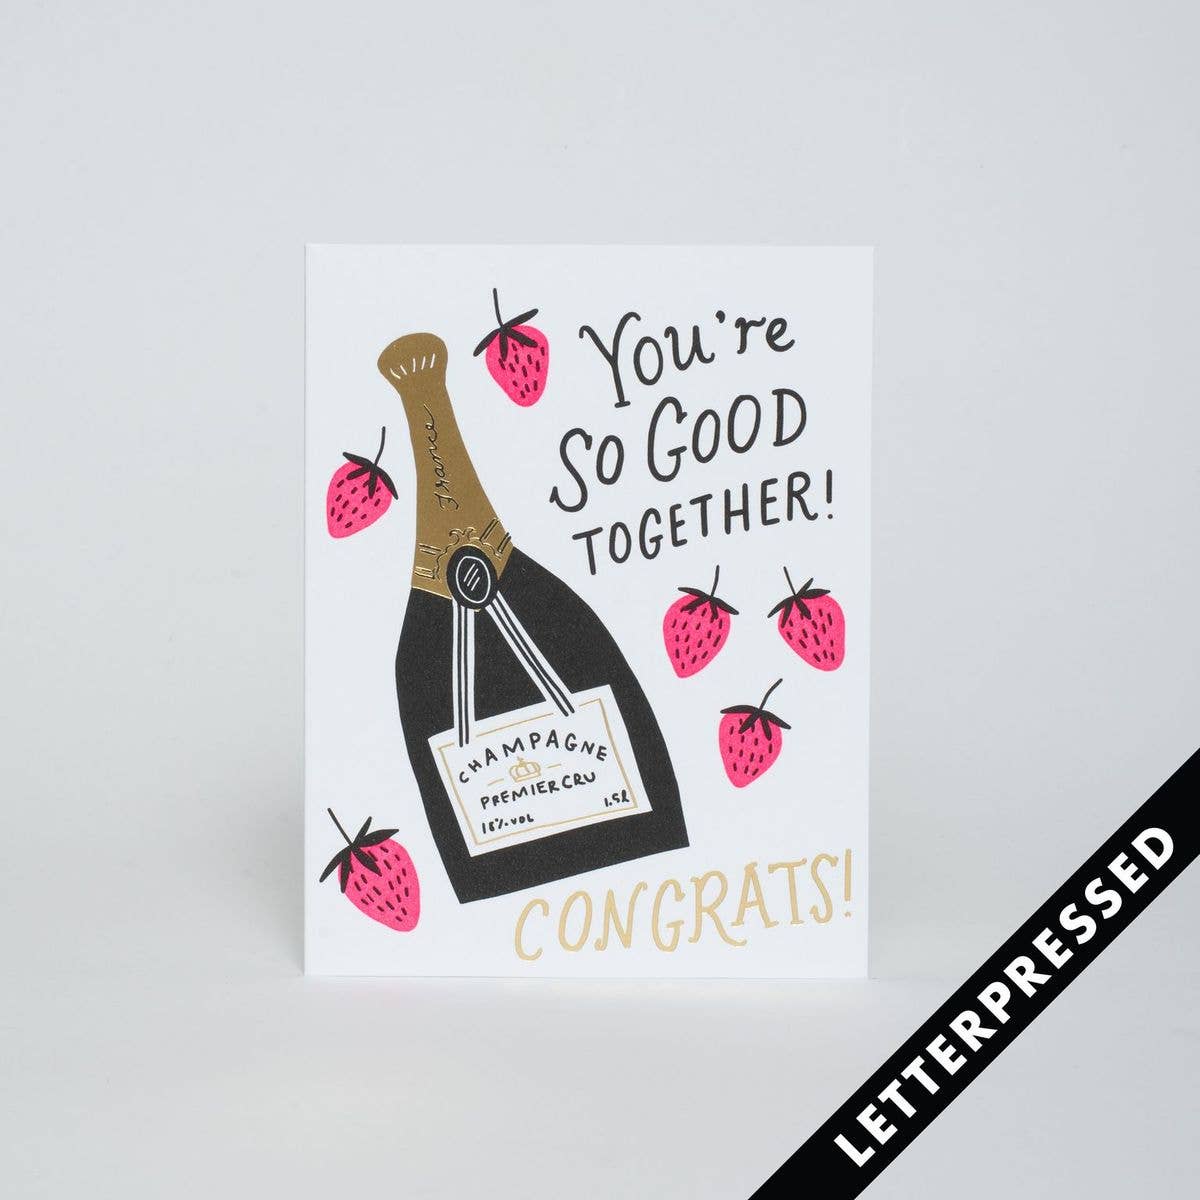 Greeting card that reads "You're so good together! Congrats!" and has a bottle of champagne with strawberries on it 